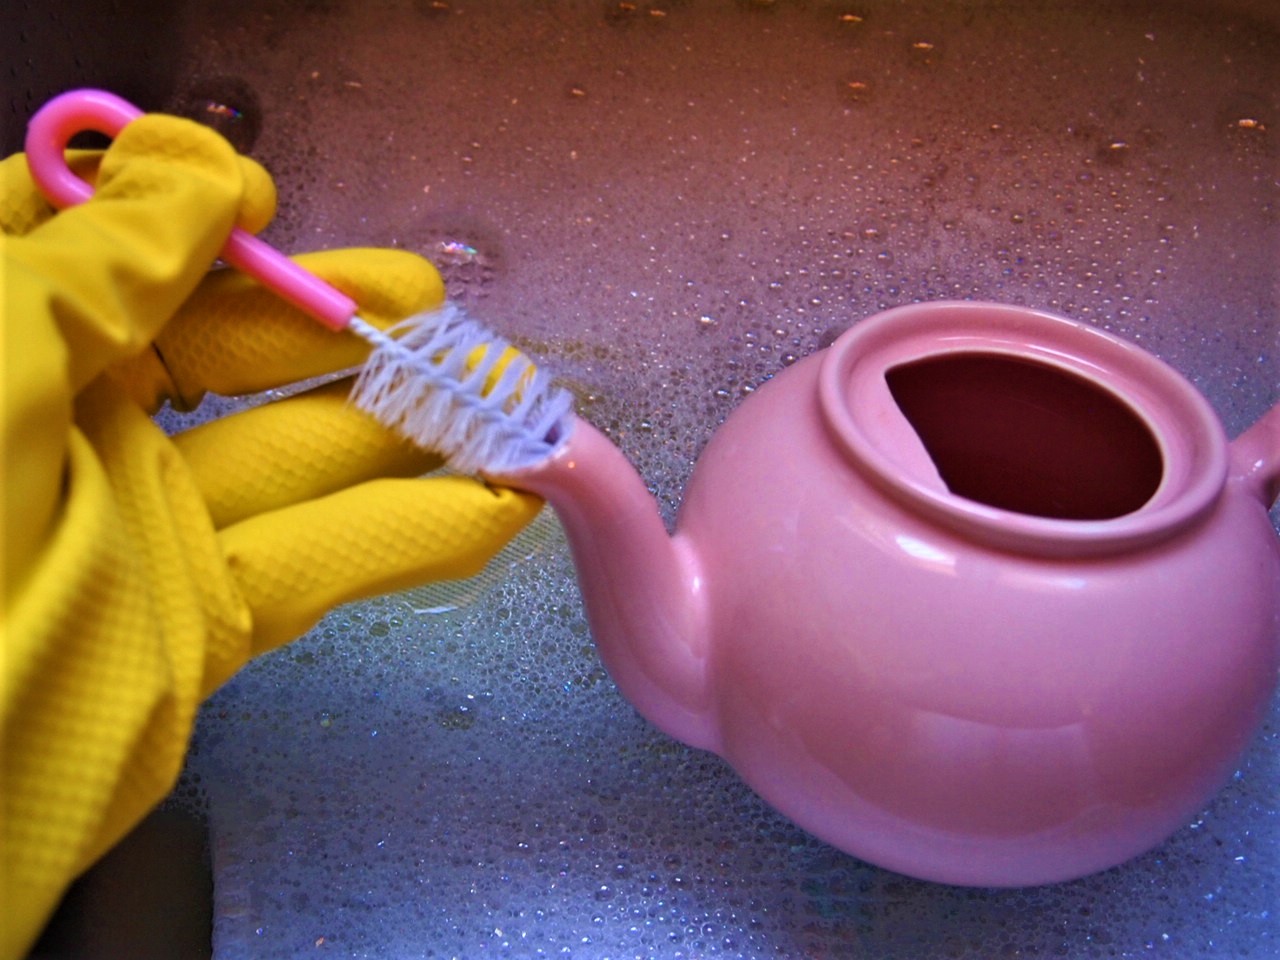 How to Care for Your Vintage China - Cleaning a teapot spout